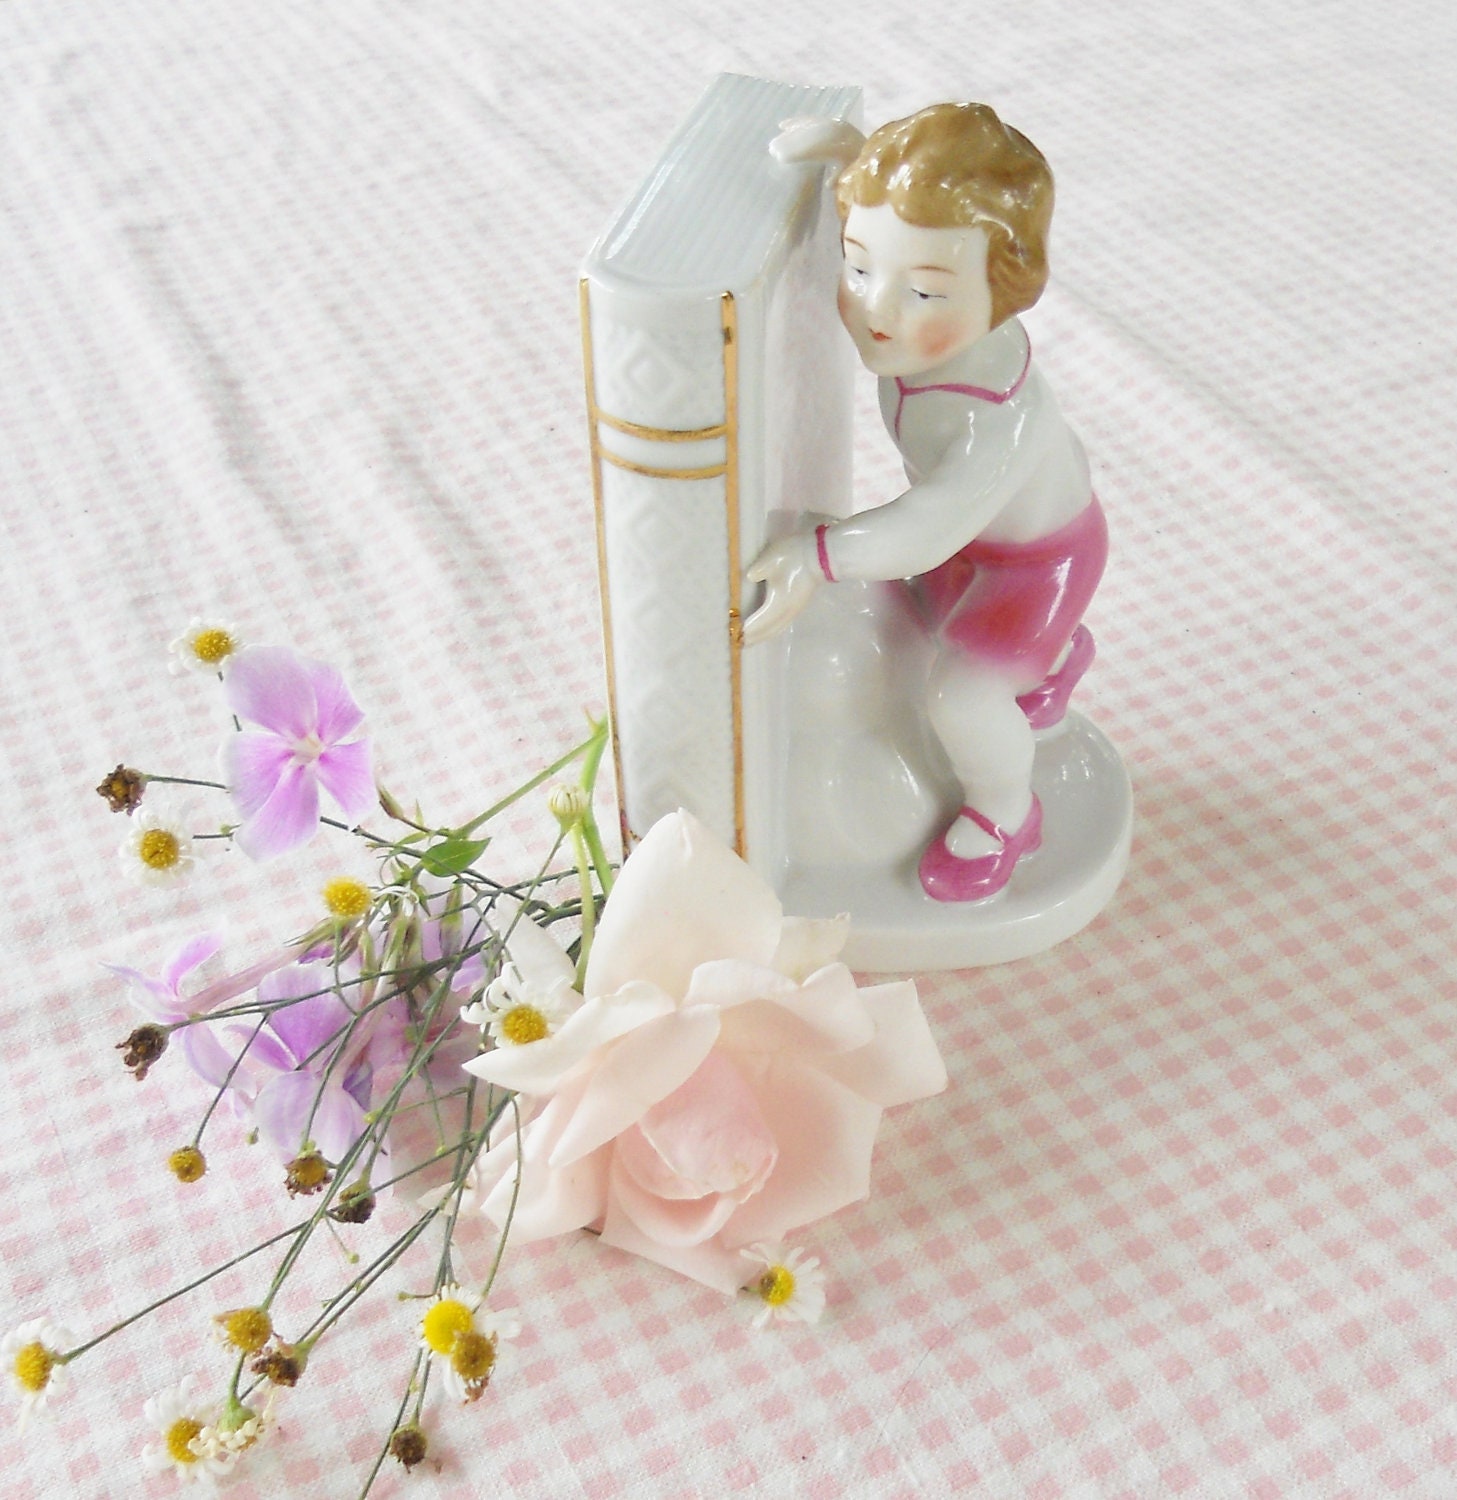 Boy and Book Figurine Bookend - Made in Germany - Vintage, French Decor, Farmhouse, Christmas, Gift, Wedding, Shabby Chic